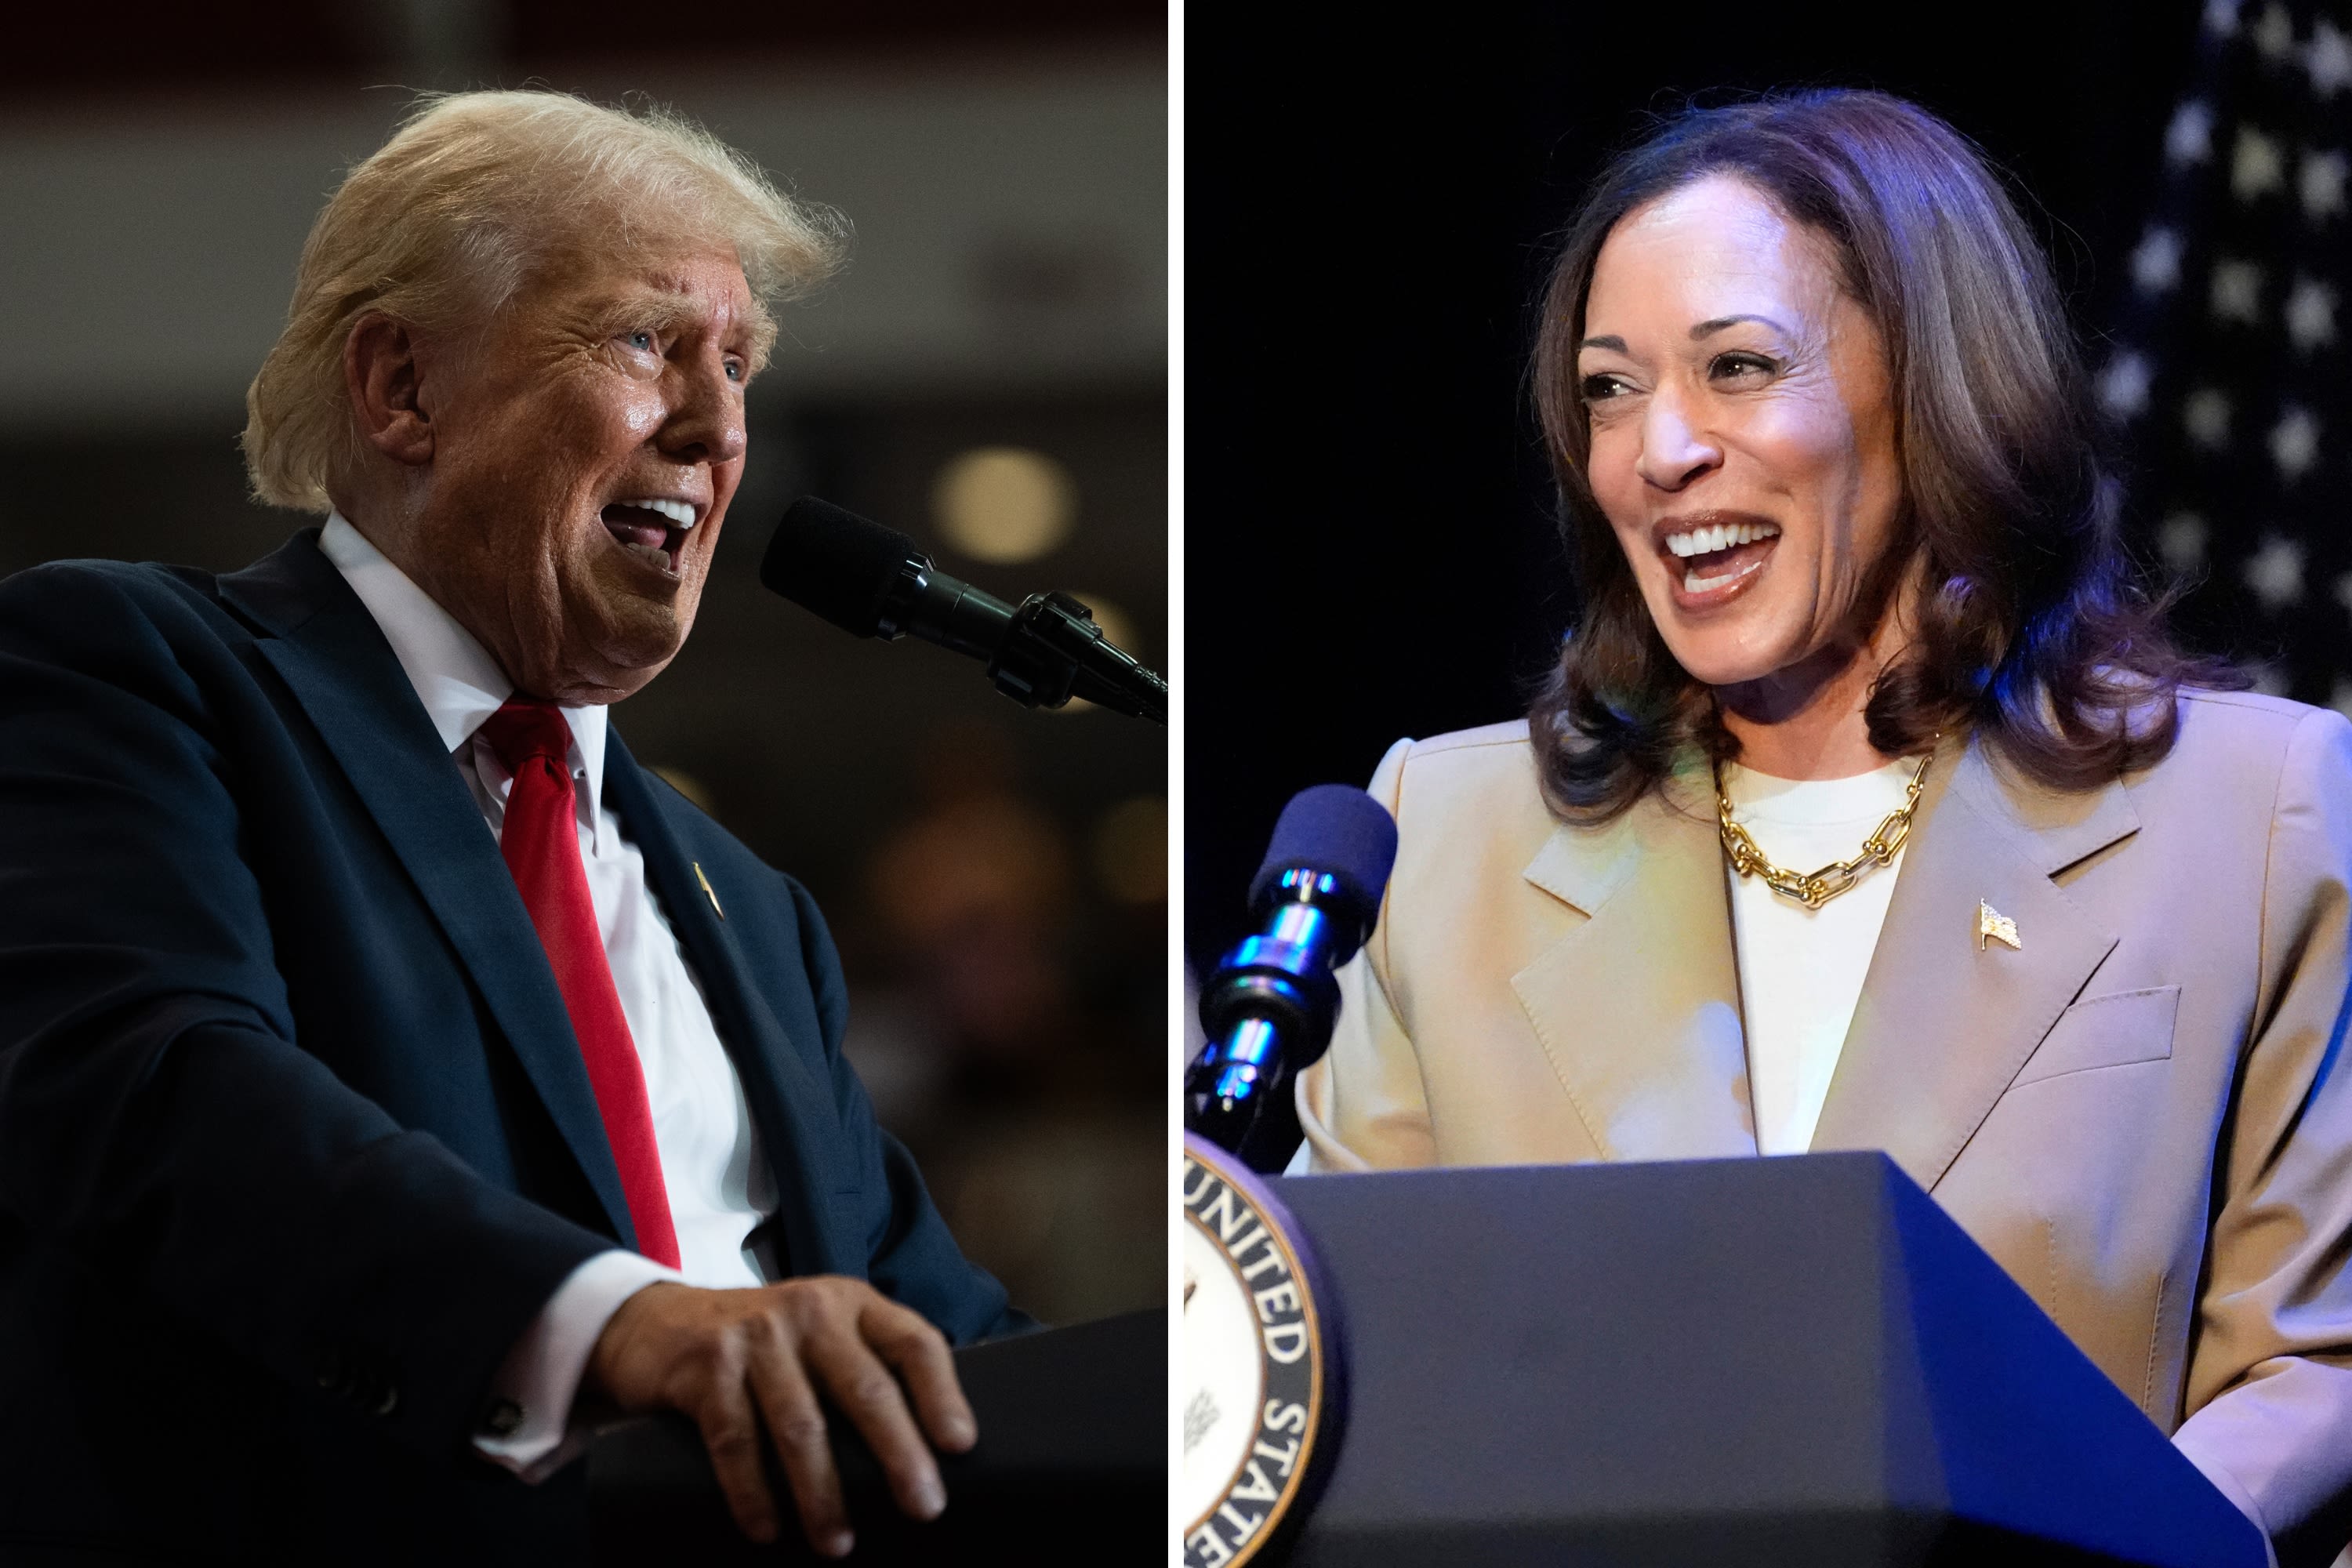 Trump sharpens attacks on Harris' immigration record in new ad